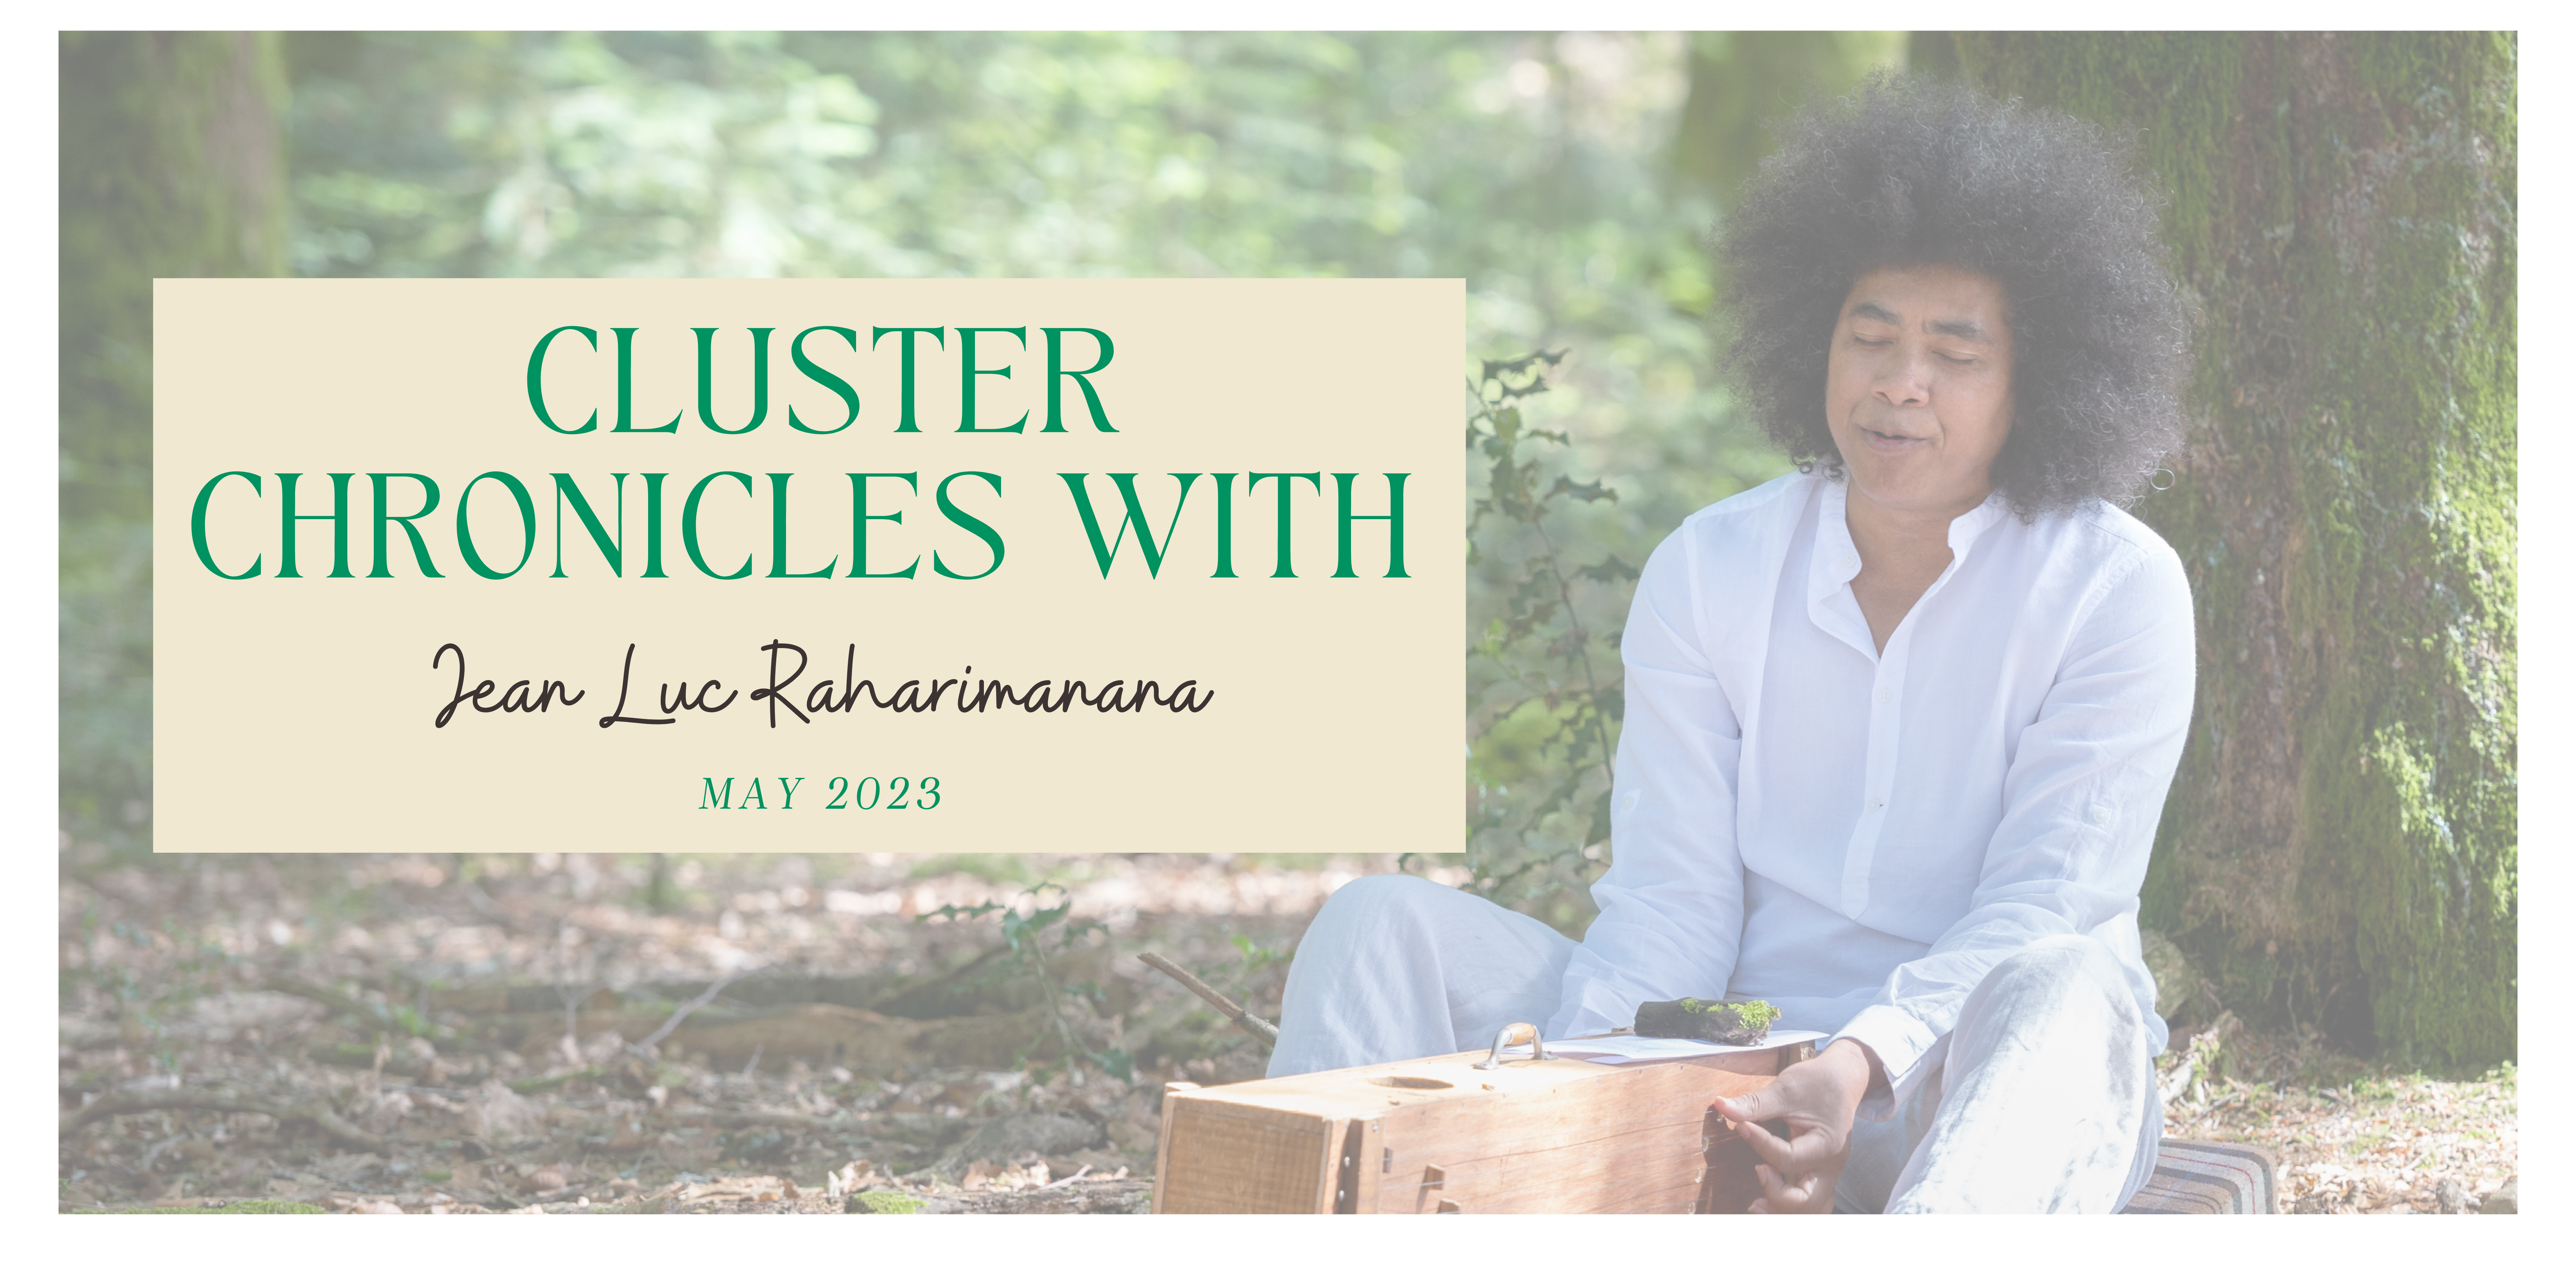 Cluster chronicles with Raharimanana